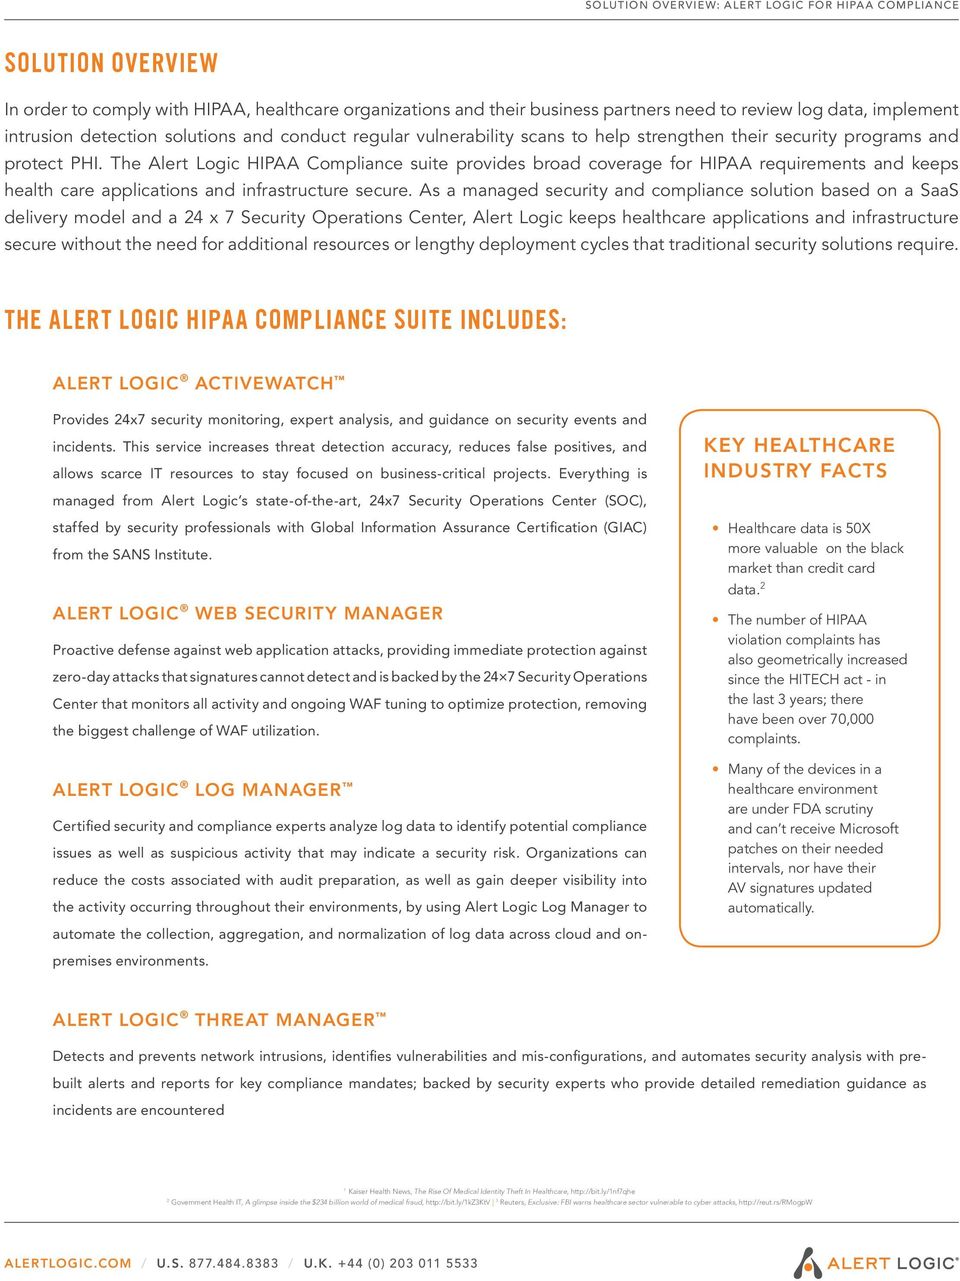 The Alert Logic HIPAA Compliance suite provides broad coverage for HIPAA requirements and keeps health care applications and infrastructure secure.